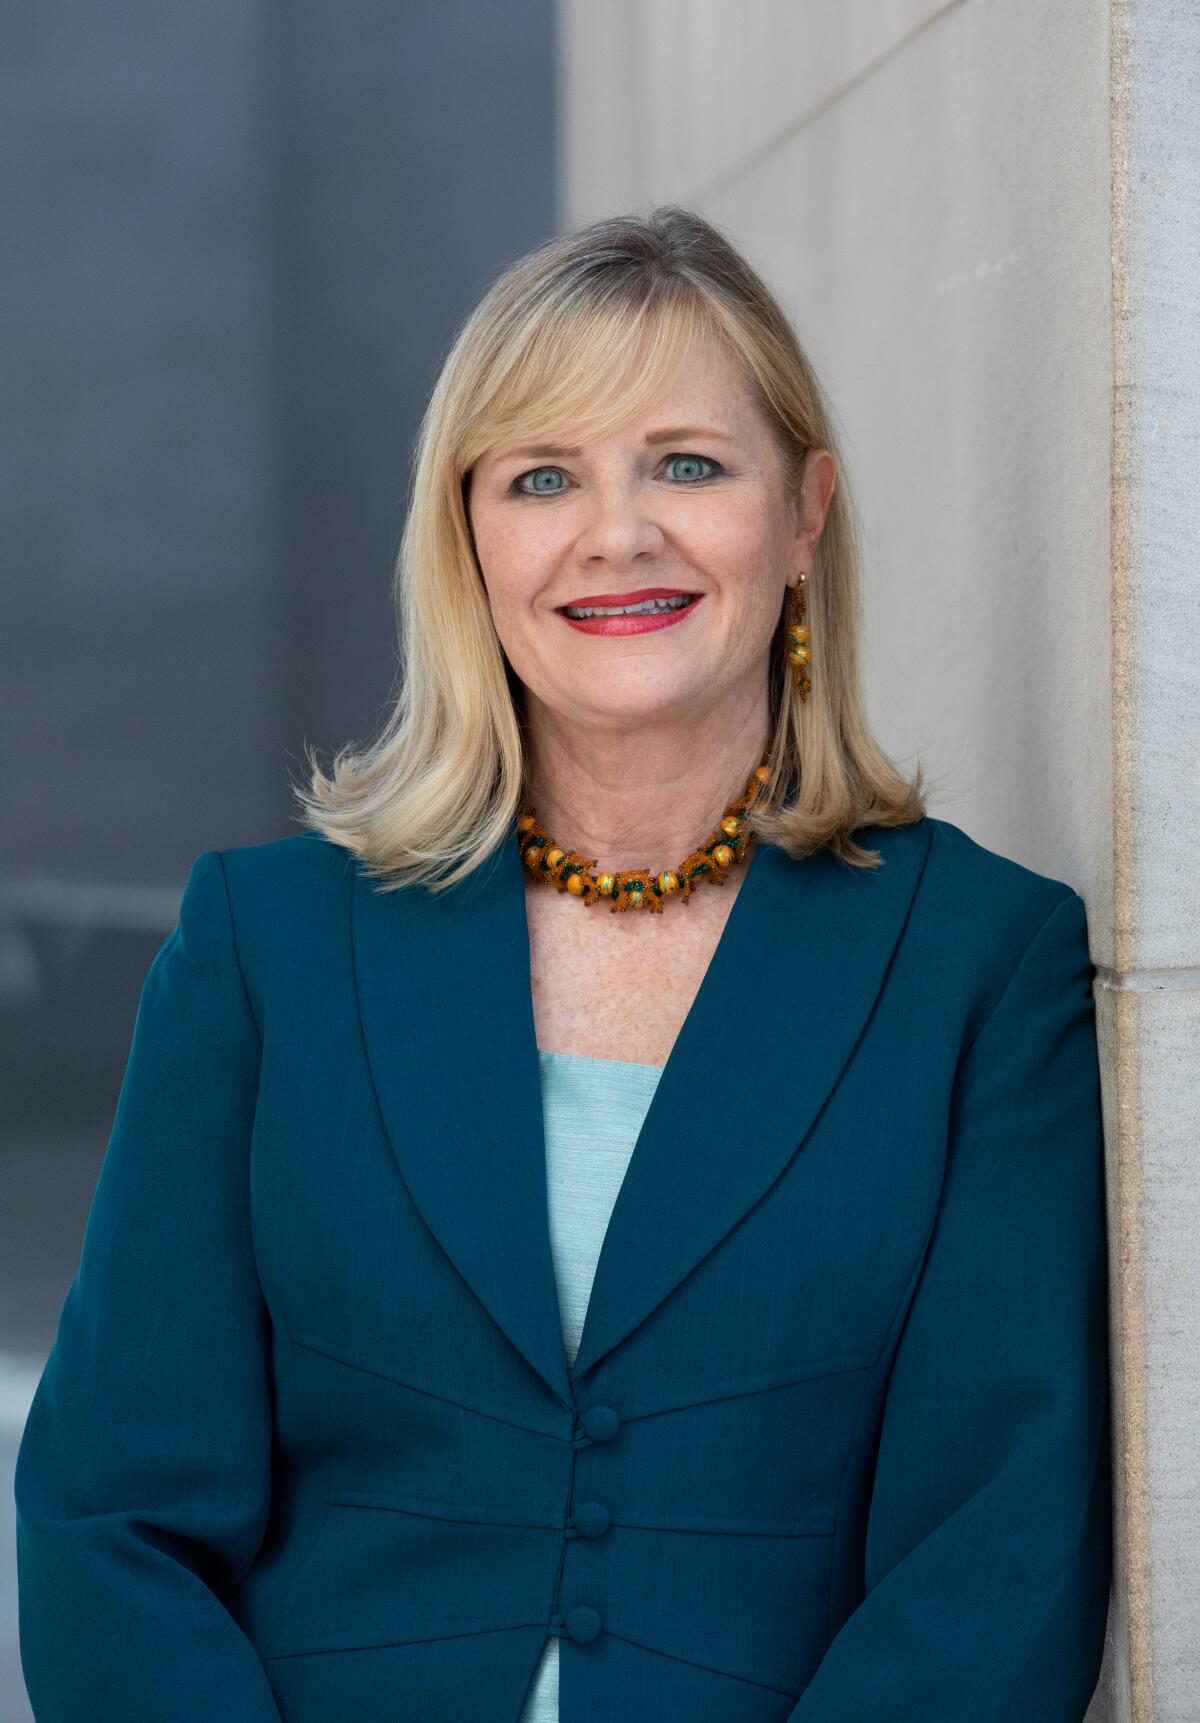 A smiling blond woman in a teal jacket.